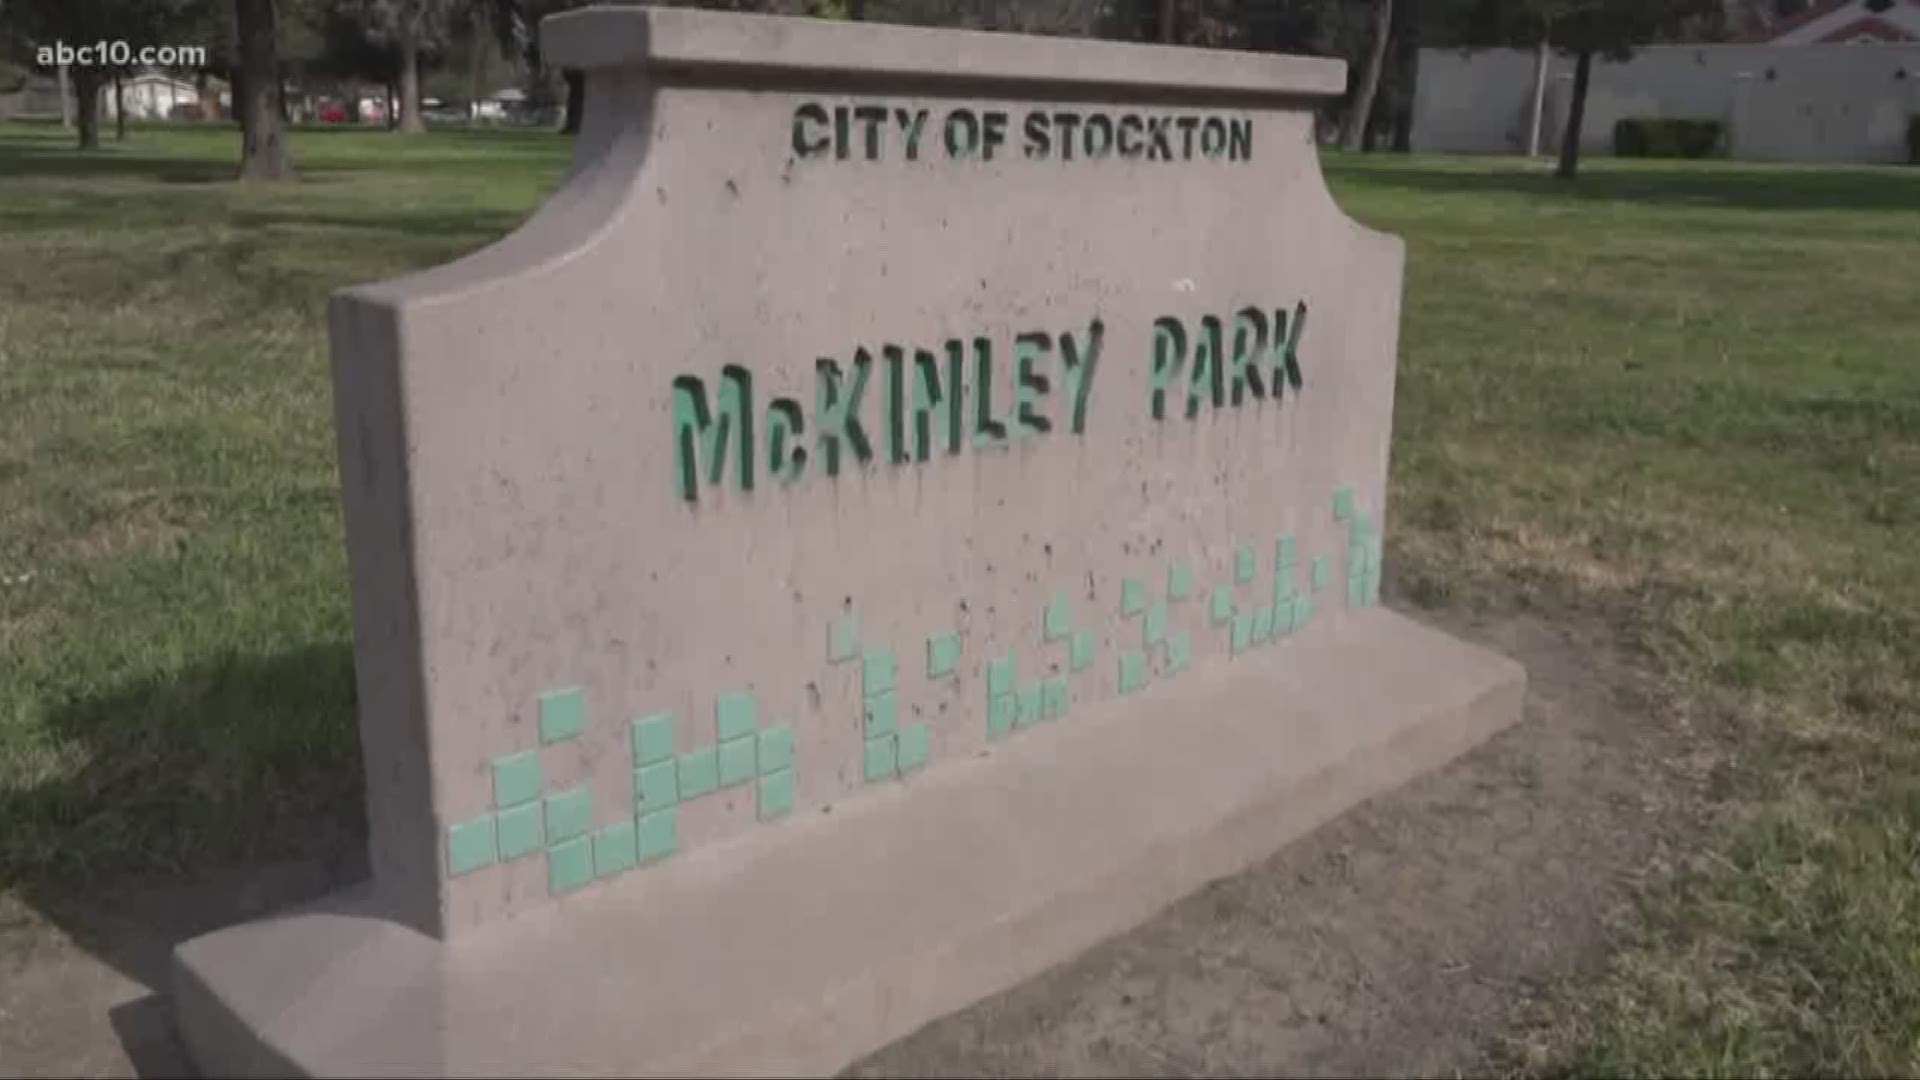 McKinley Park has been in poor condition for a while, but, with $8.5 million on hand, it’s getting a serious upgrade.